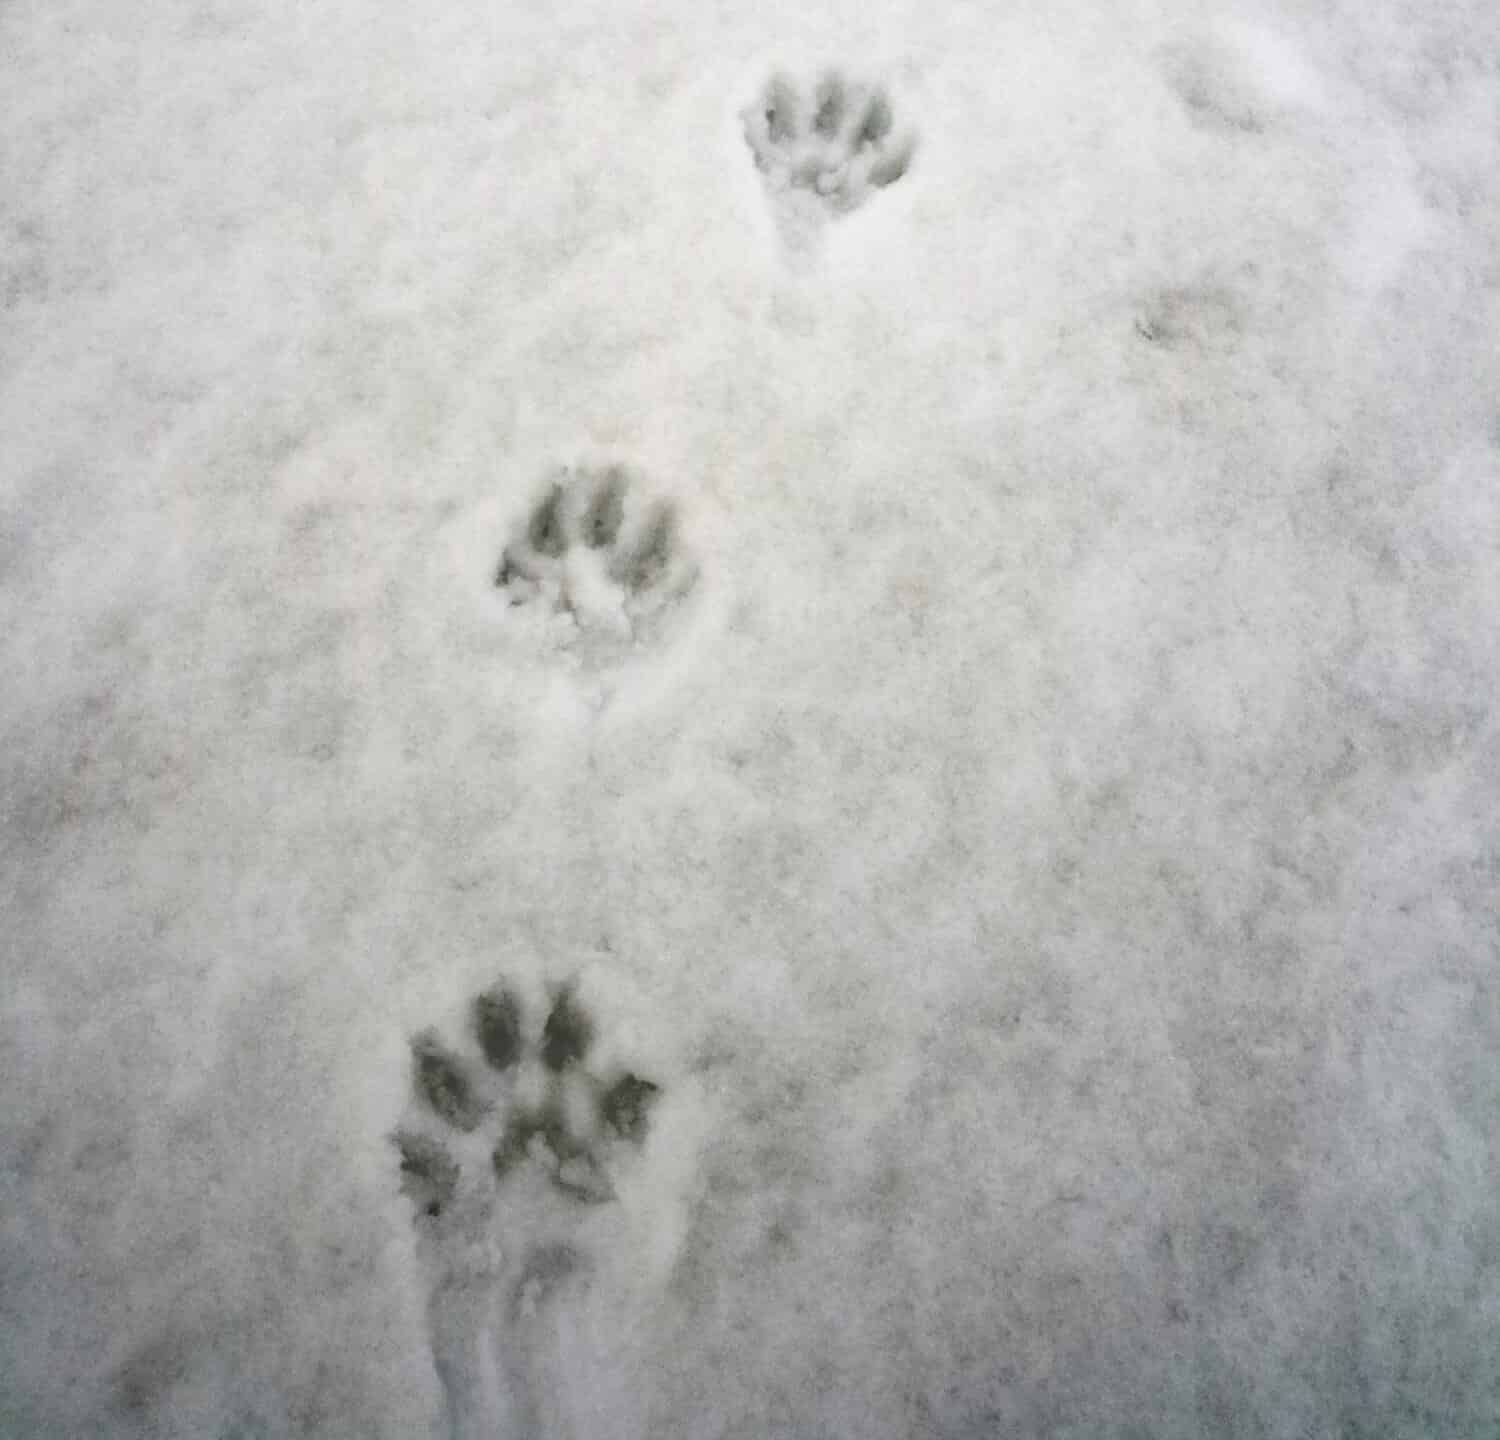 Traces of wolverine or Gulo gulo on spring melting snow in May. Chain of wolverine paw prints on the grainy dark snow cover. Predatory mammal of the marten family. 